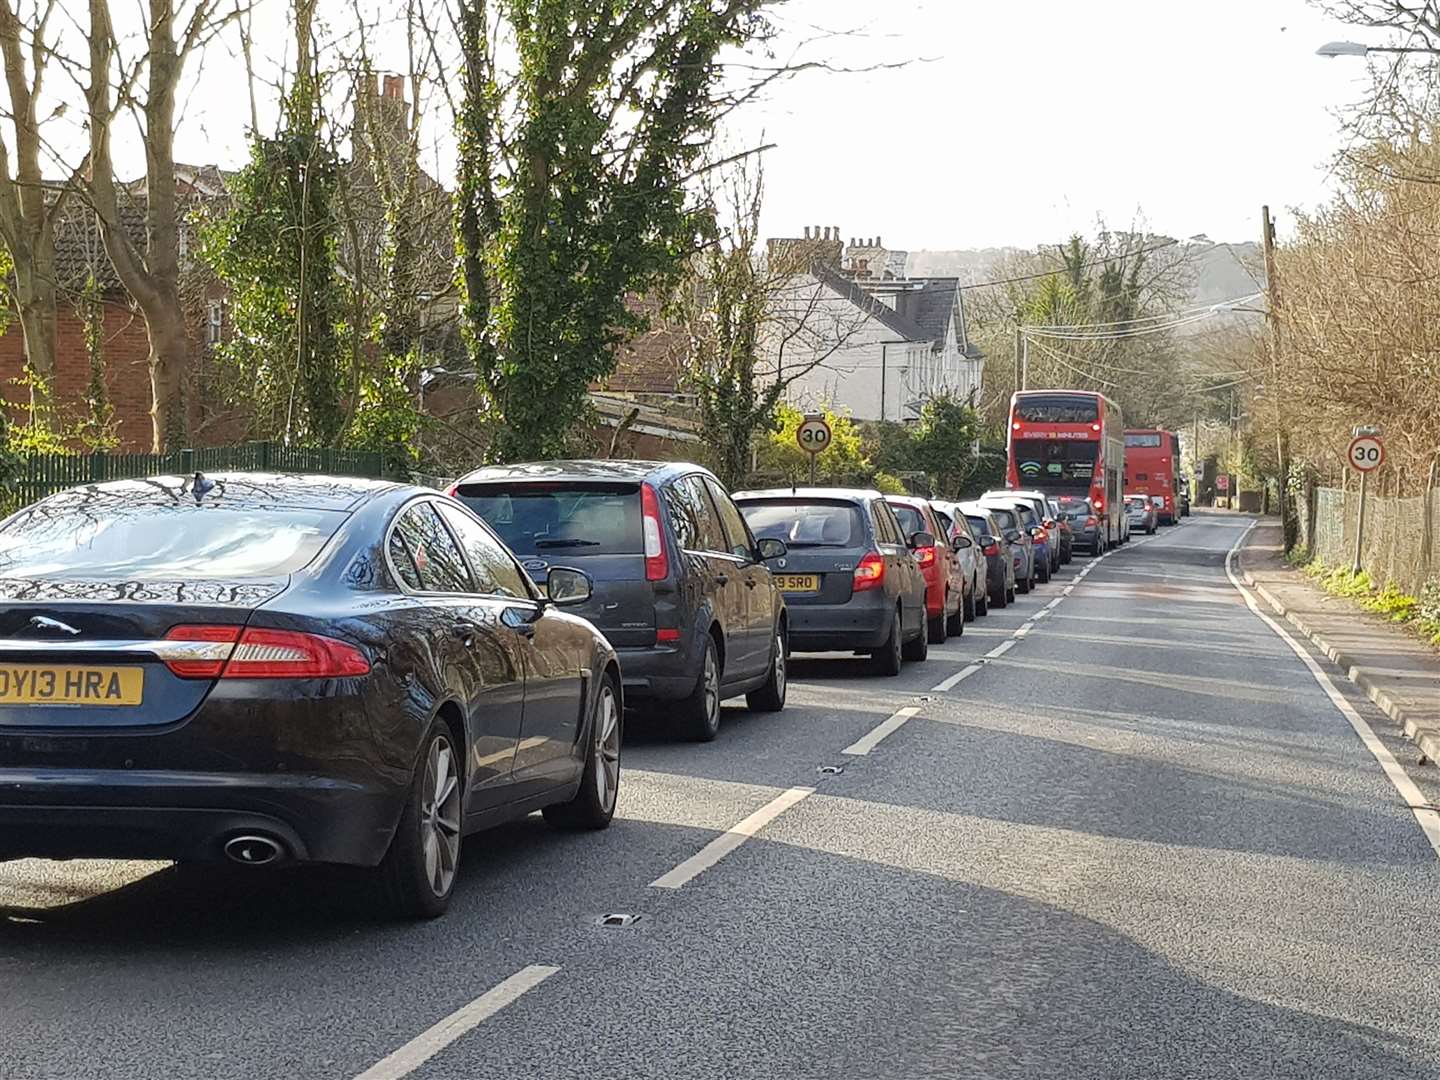 The closure has regularly brought traffic on Sturry Hill to a standstill